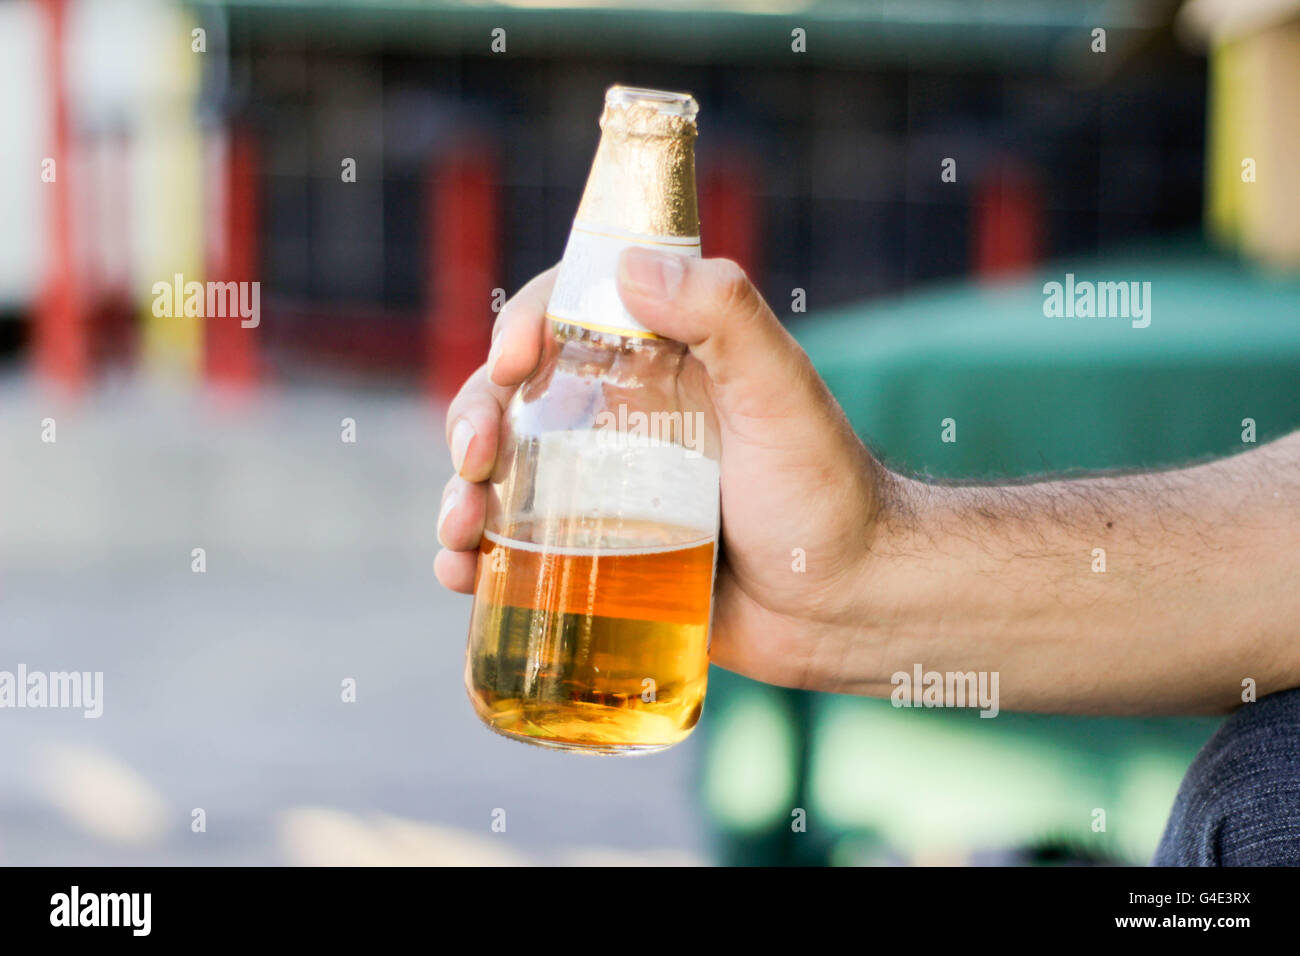 Photograph of a hand holding a beer bottle Stock Photo